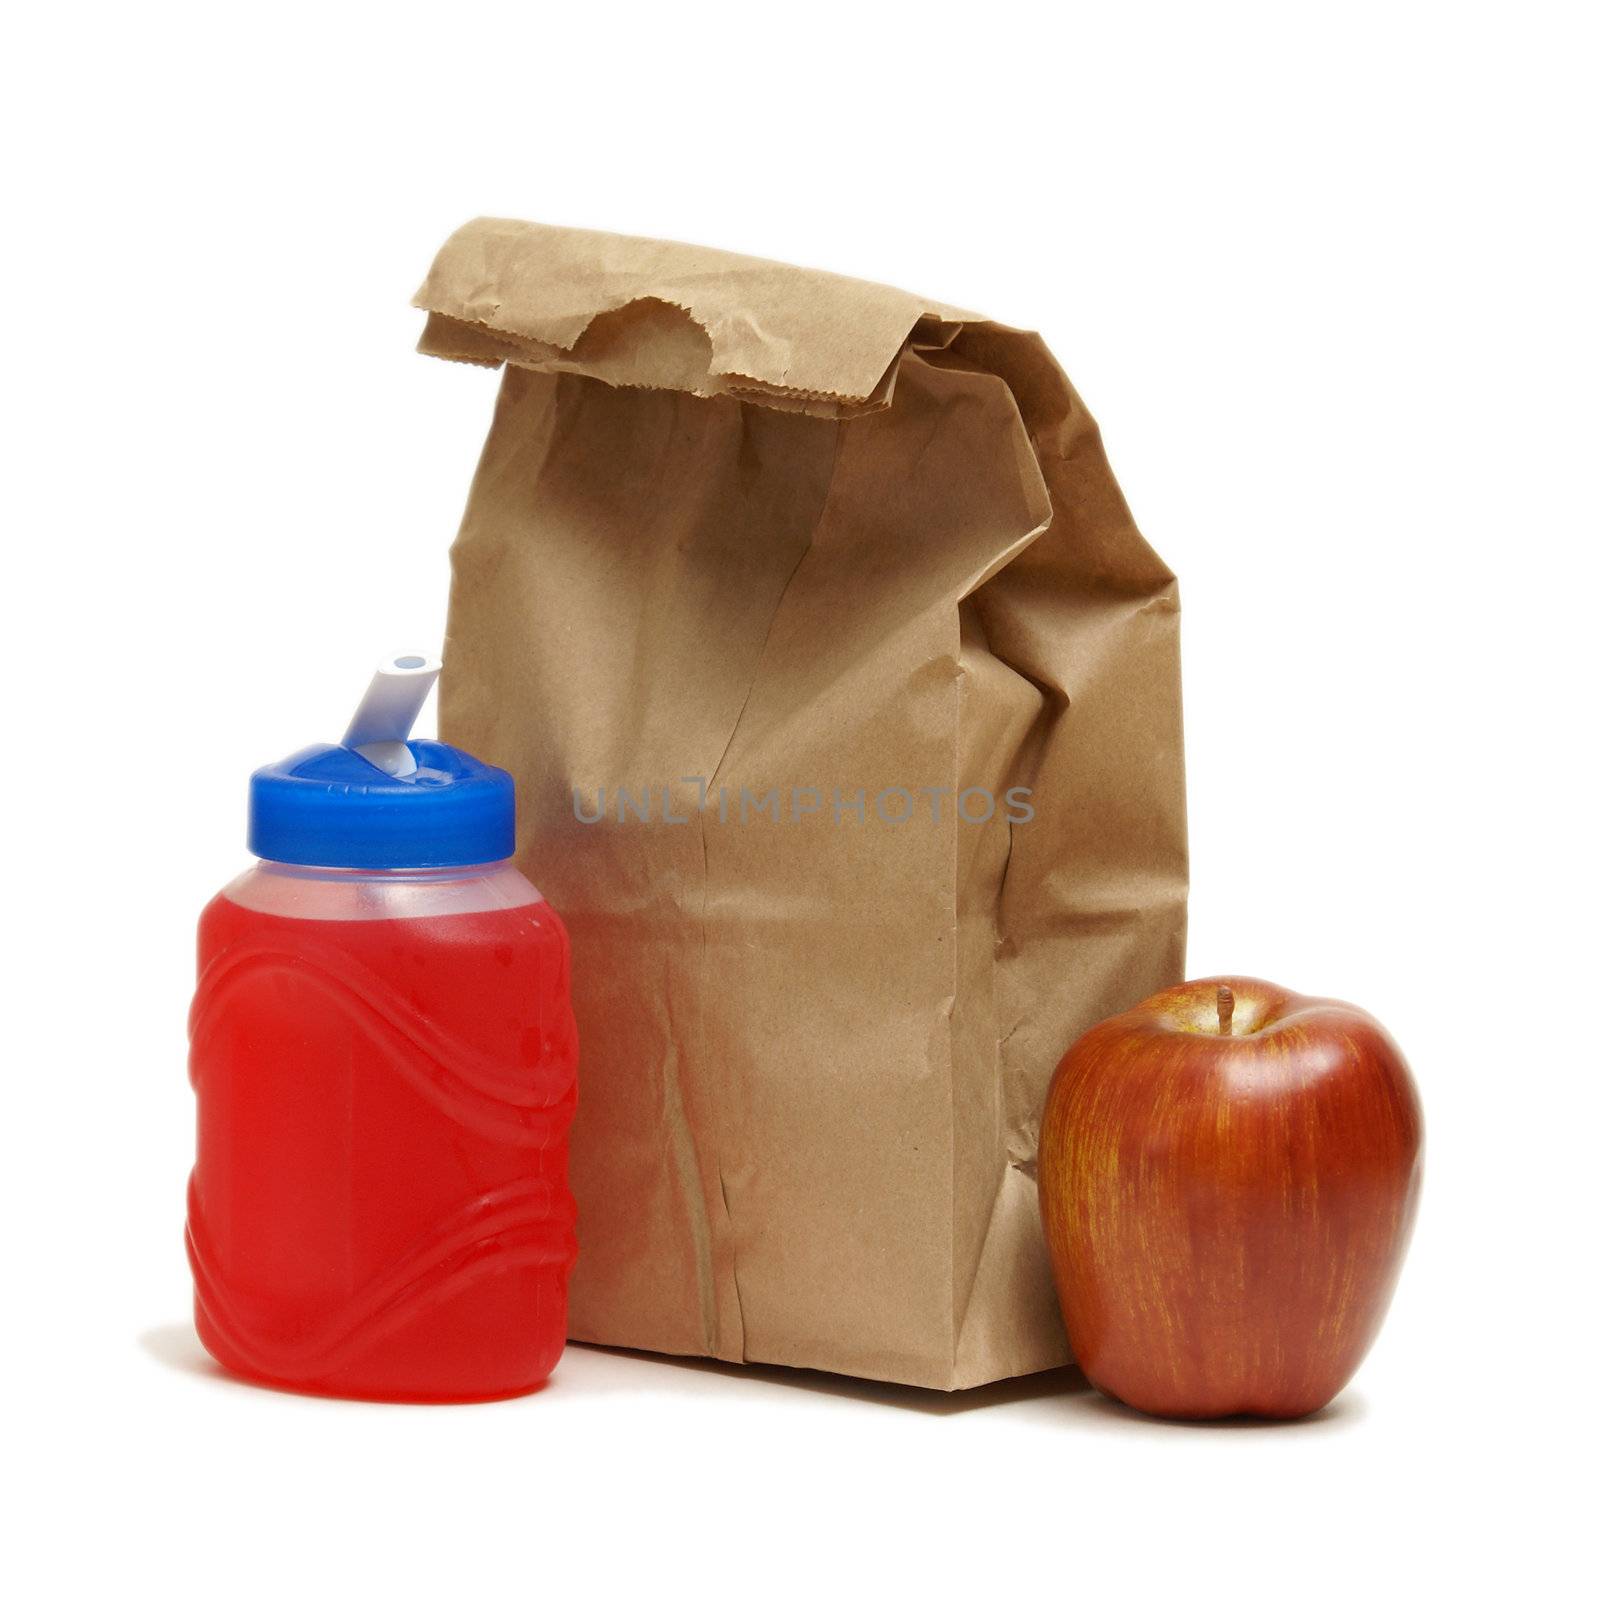 A great way to save money is by brown bagging it to work or school and its usually healthier too.